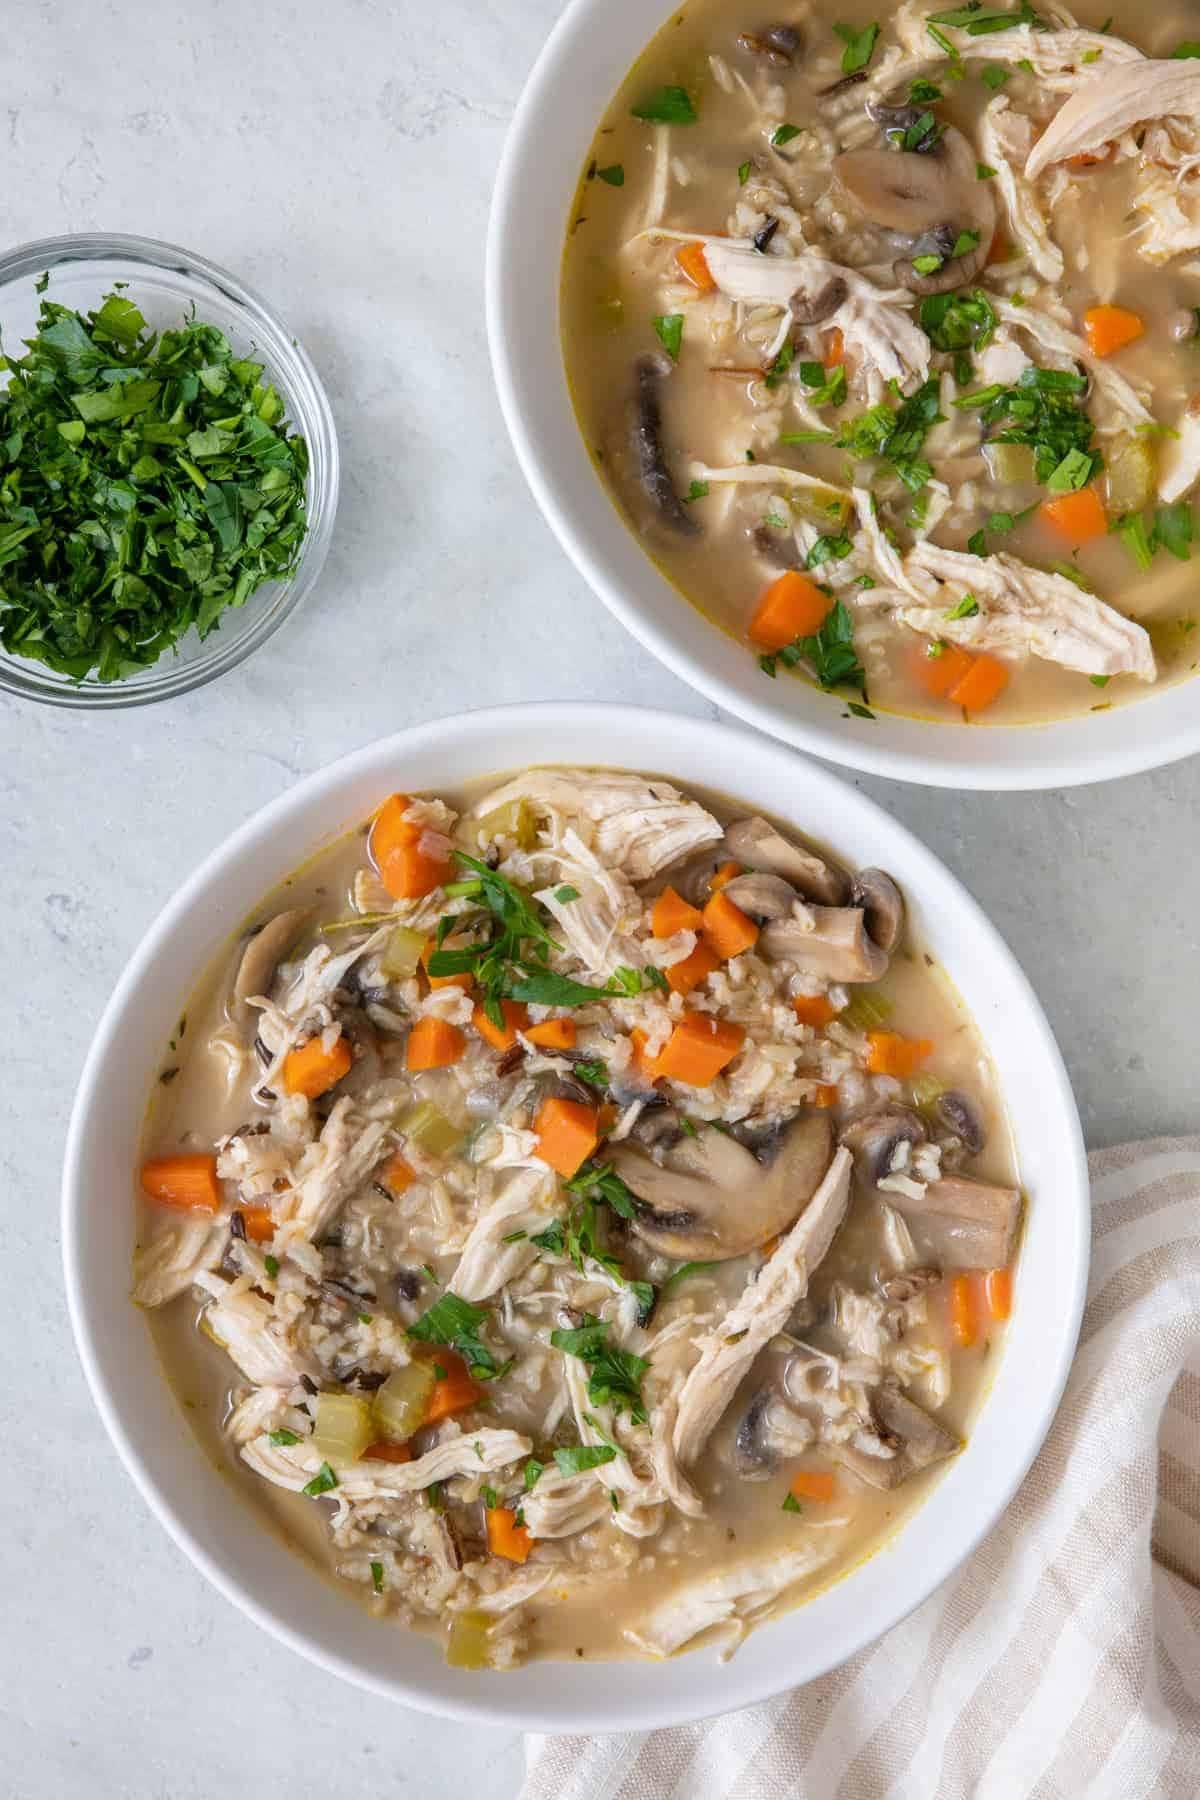 Chicken wild rice soup with white beans, carrots, mushrooms, and herbs in a bowl- top view